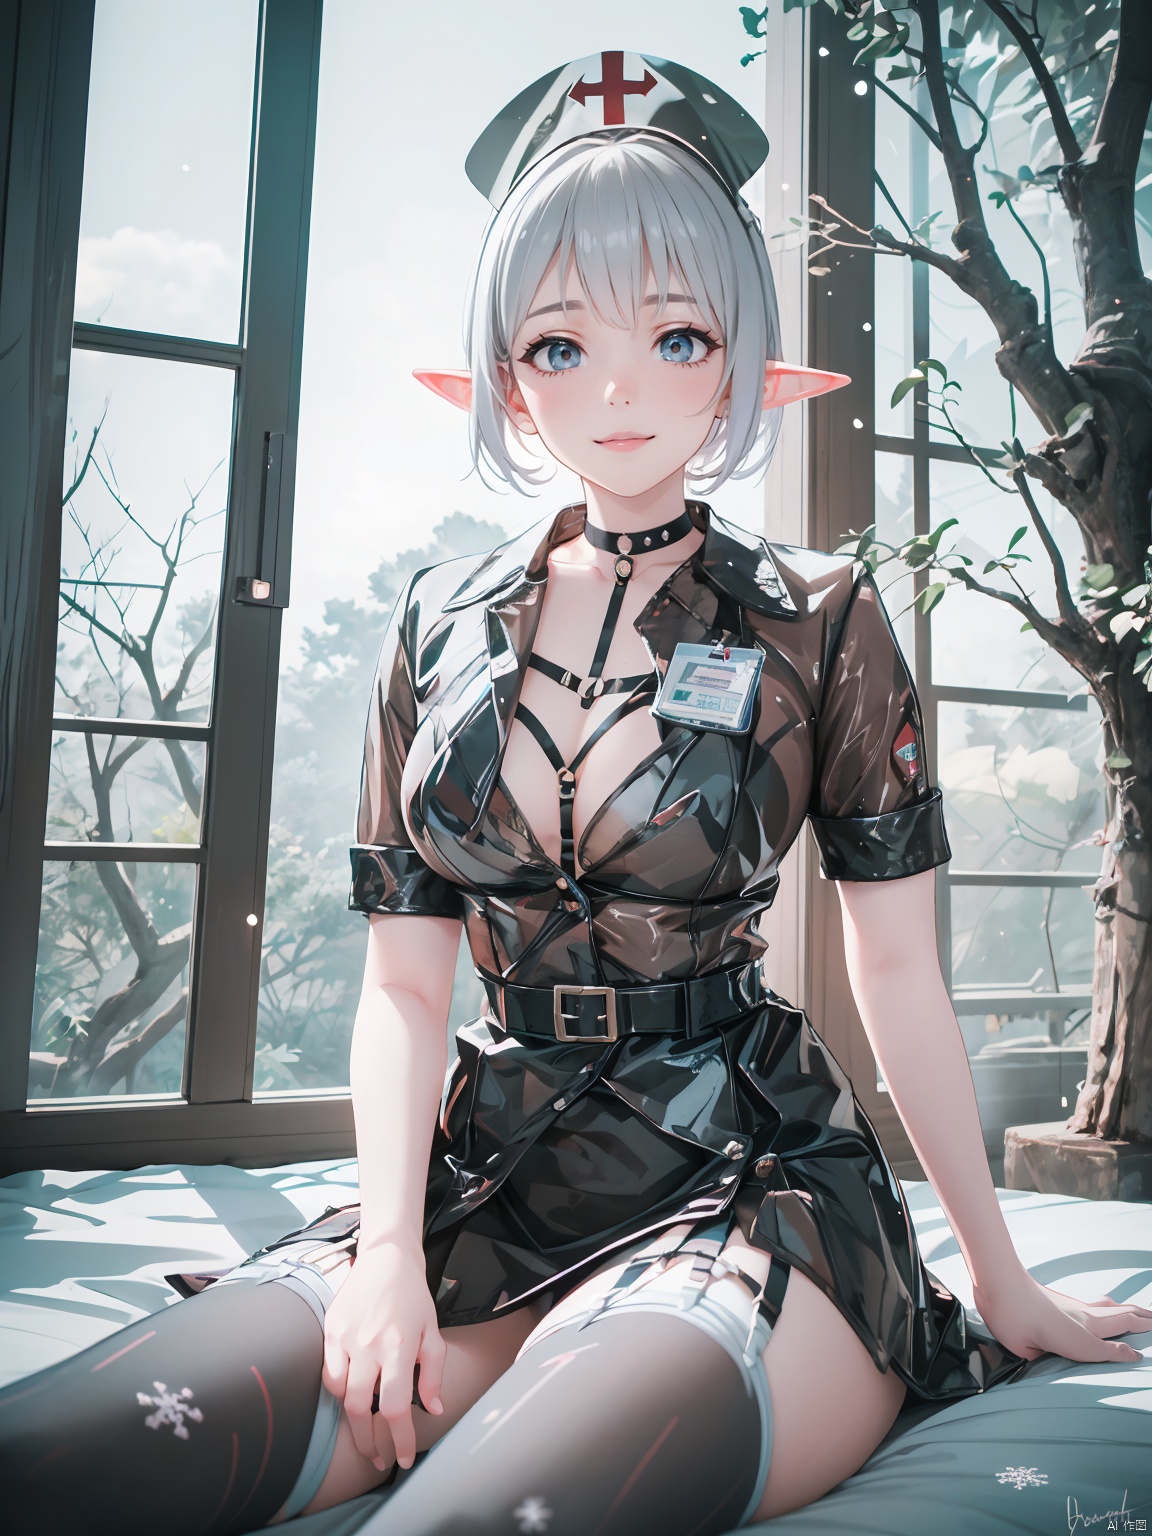  tutututu,bondage,solo,thighhighs,nurse cap,harness,see-through,nurse,choker,garter straps,black choker,garter belt,chest harness,skirt,,era elf,(giant elves sit on the treetops:1.2),(snowflakes:1.4),(blue skin),enchanting beauty,(fantasy),(elf mother tree),(world tree),ethereal glow,pointed ears,delicate facial features,long elegant hair,mystical ambiance,soft lighting,tranquil expression,harmonious with nature,subtle magical elements,serene,dreamlike quality,pastel colors,1person blue_skin,(castle),